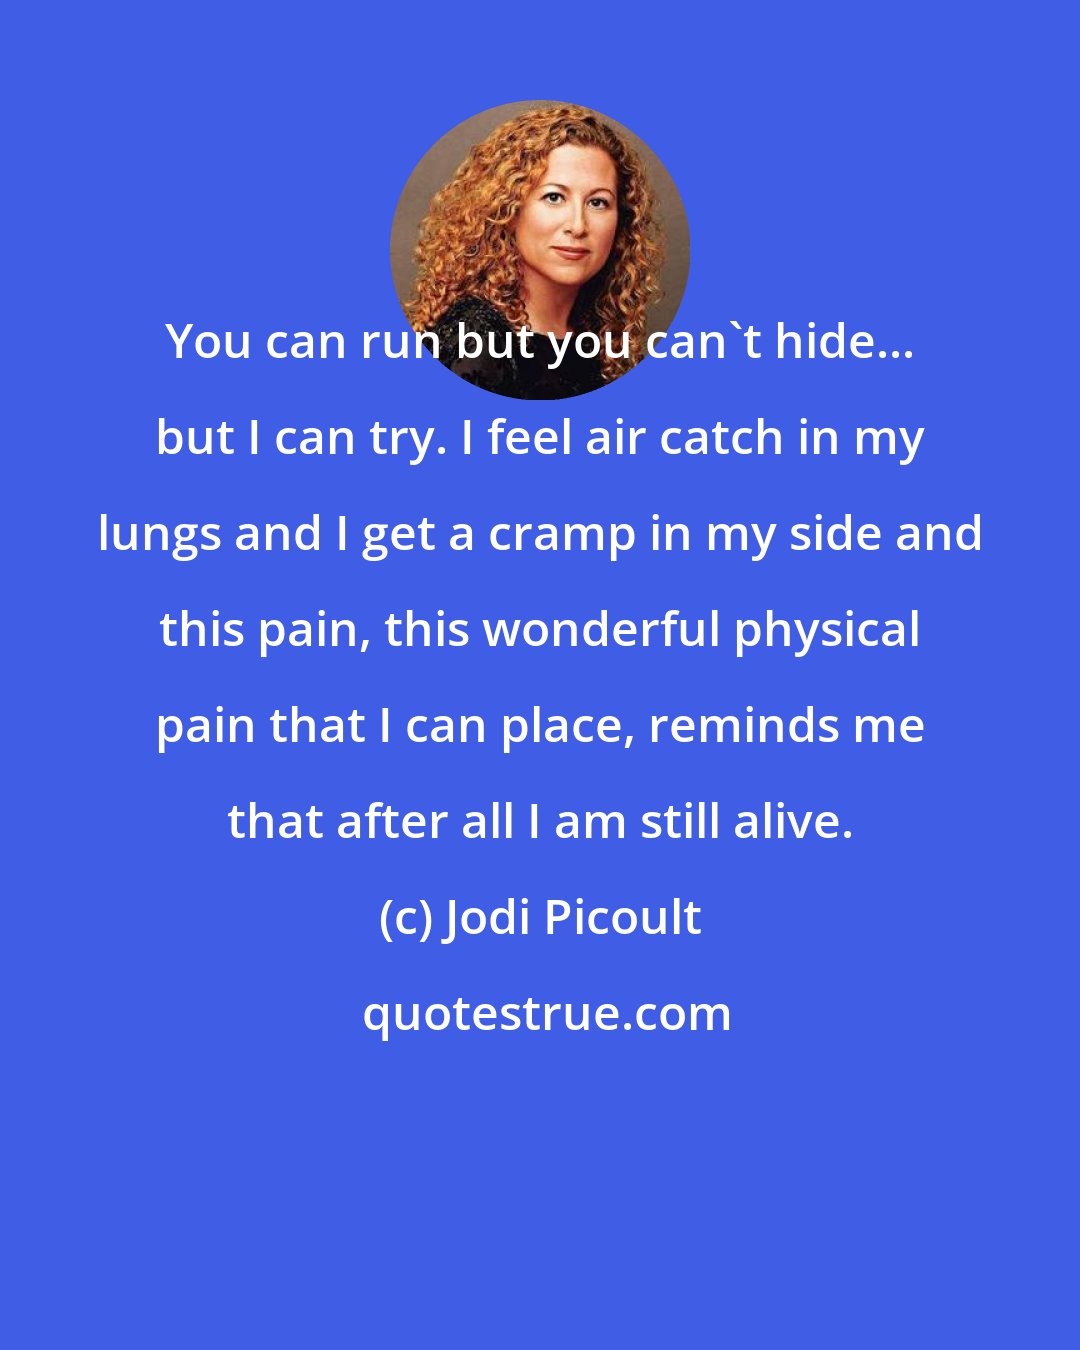 Jodi Picoult: You can run but you can't hide... but I can try. I feel air catch in my lungs and I get a cramp in my side and this pain, this wonderful physical pain that I can place, reminds me that after all I am still alive.